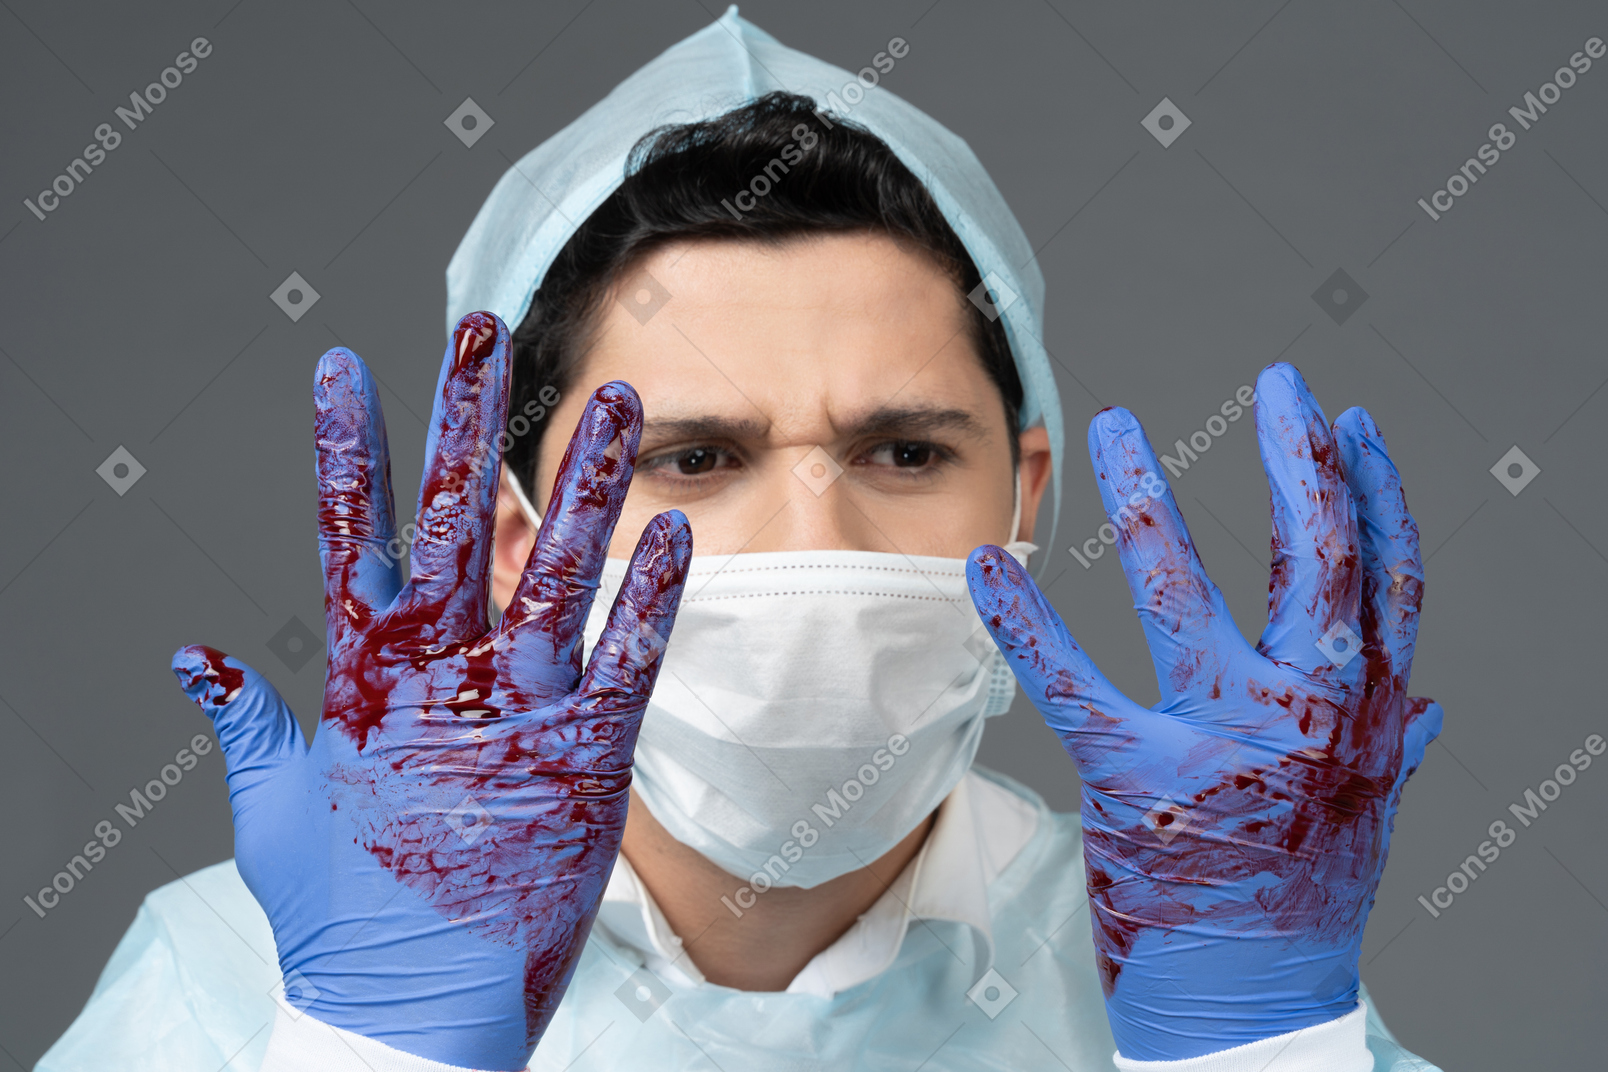 Doctor looking at his hands covered in blood